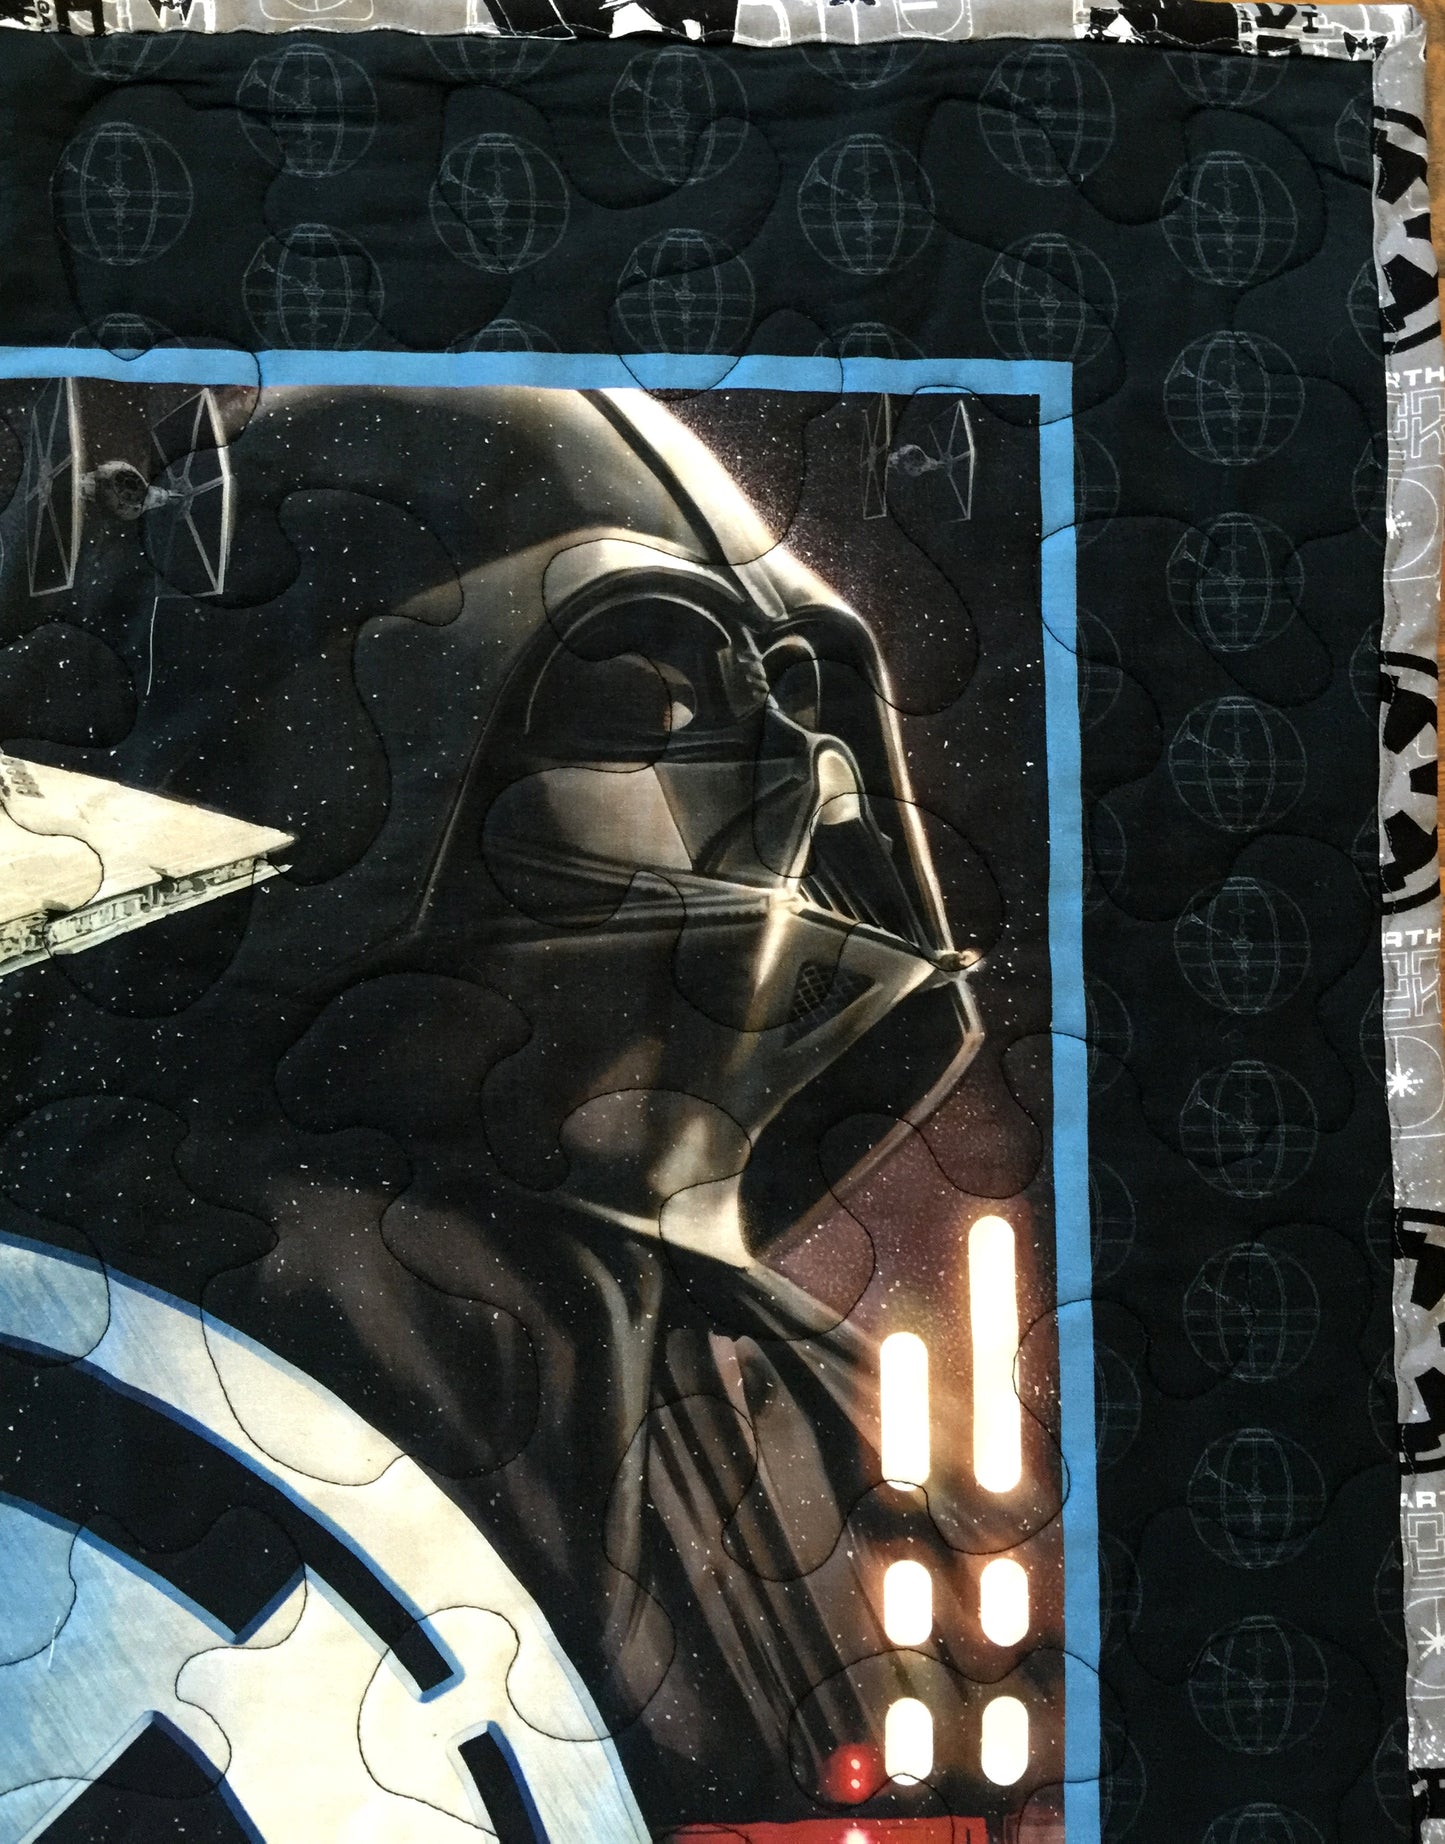 Star Wars Rogue One Villains inspired Quilted Blanket